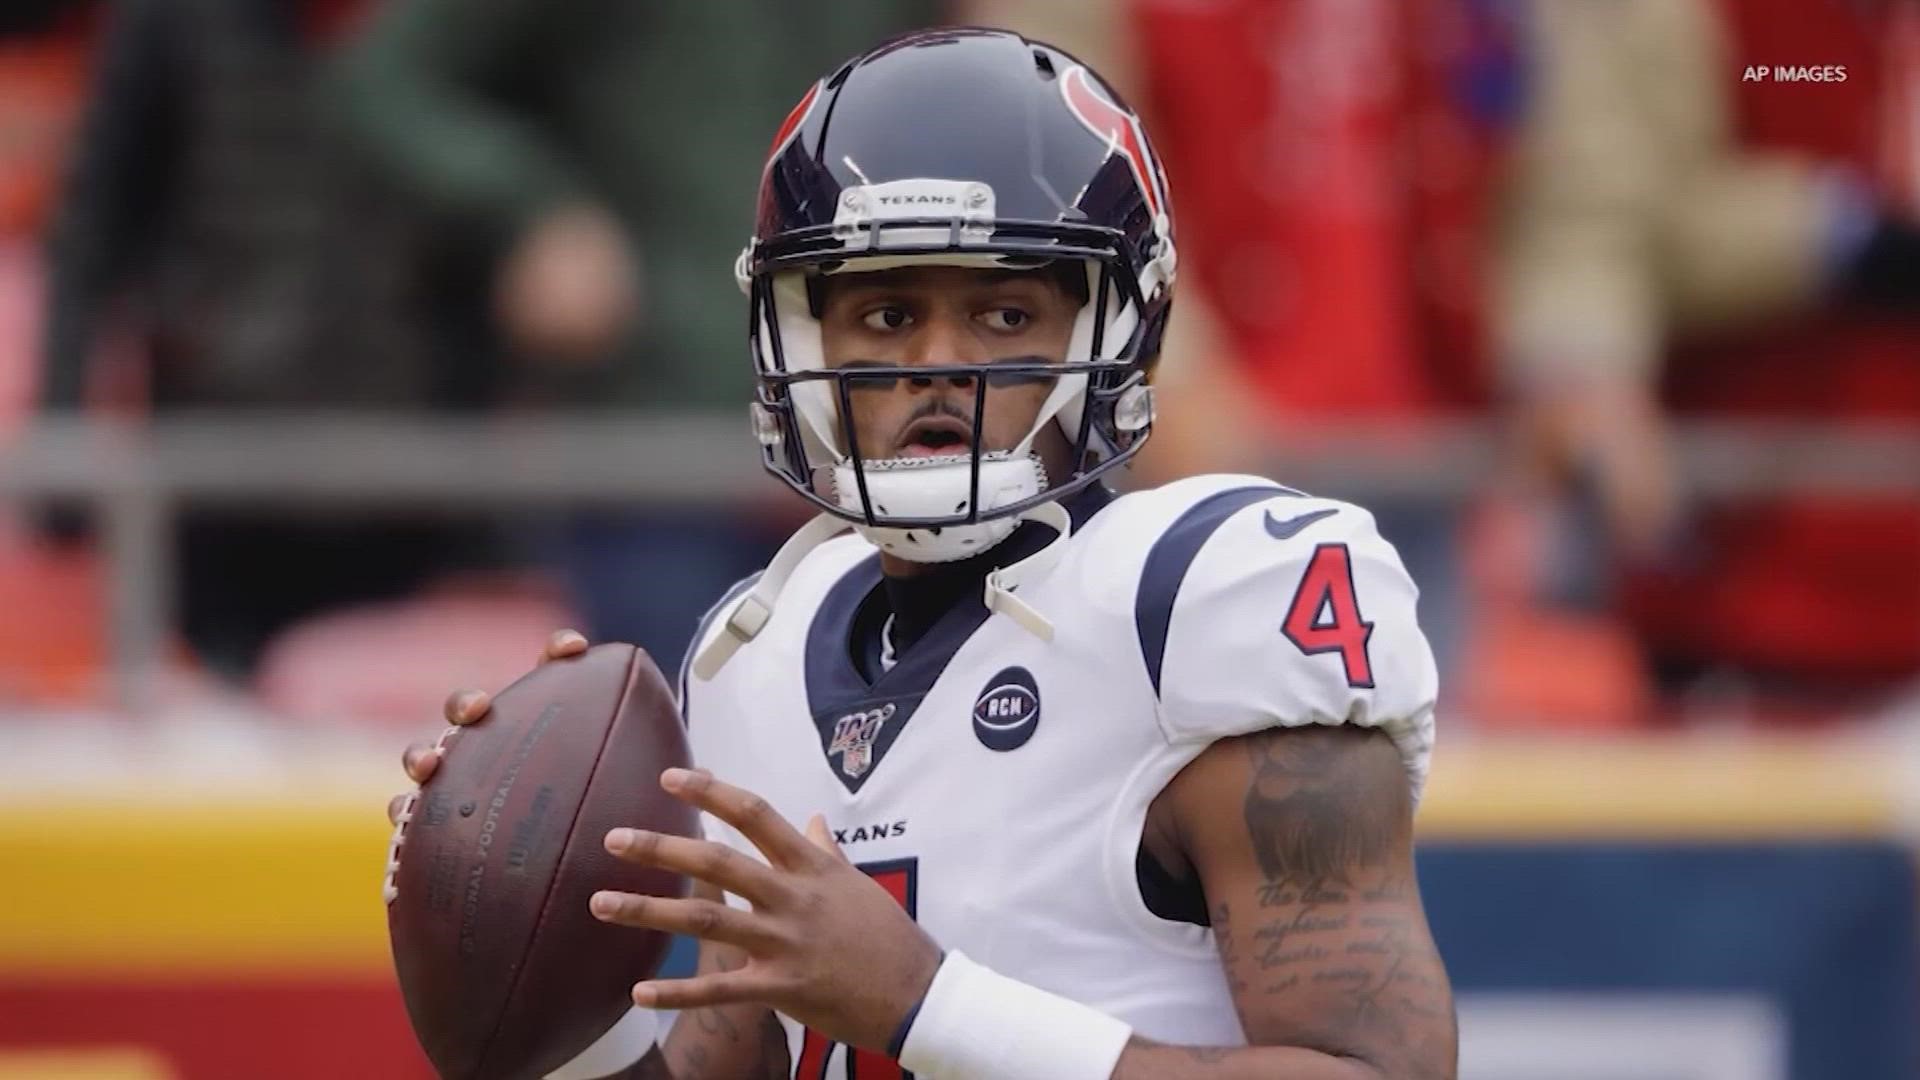 The attorney for Deshaun Watson said the FBI is investigating one of his accusers for possible extortion.